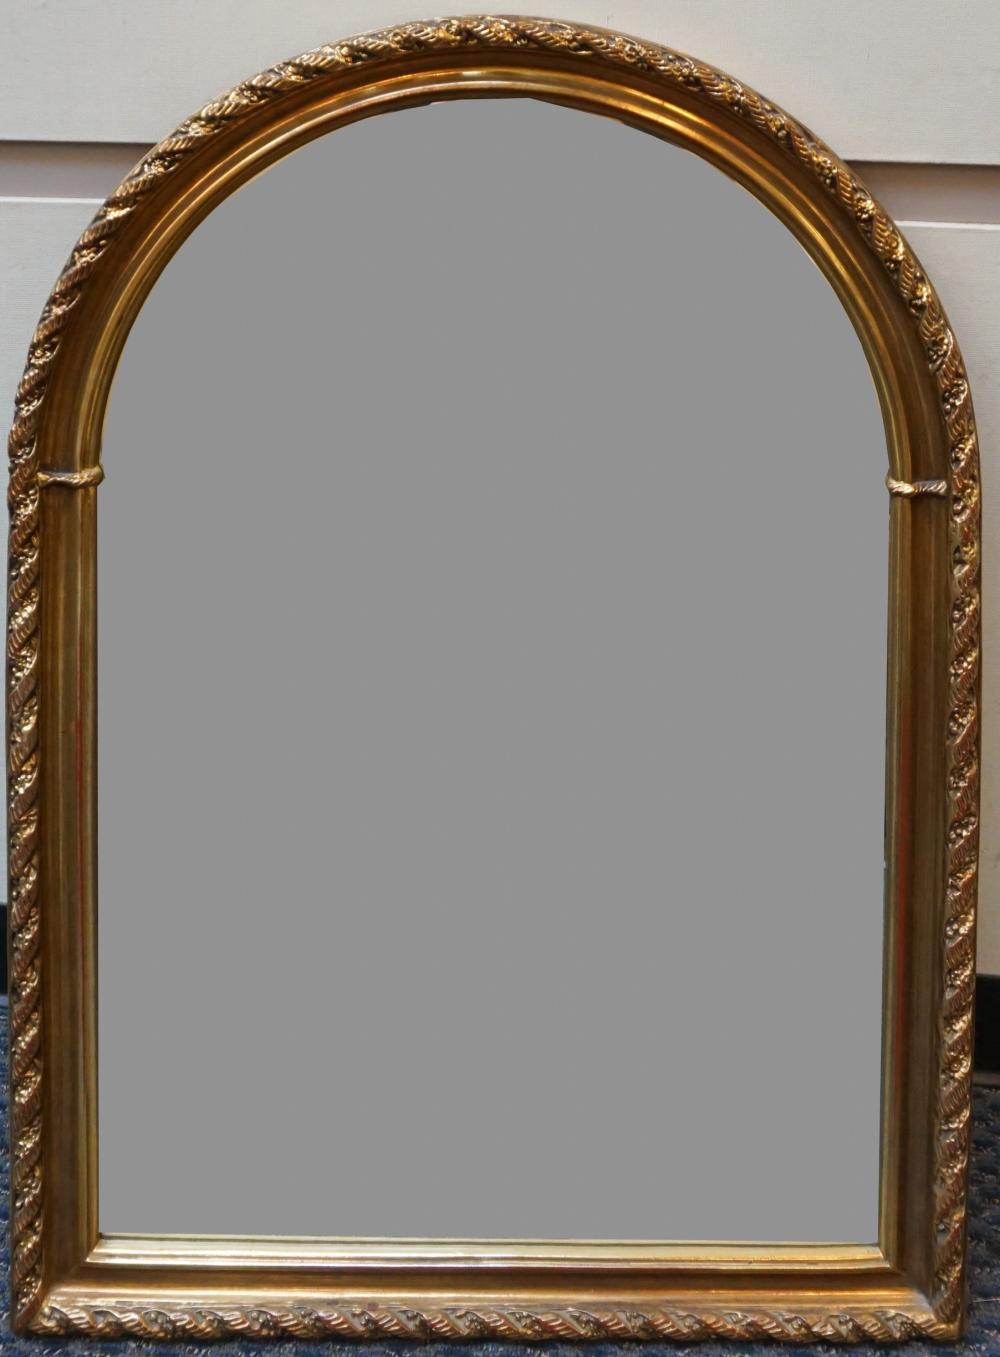 GILT PAINTED ARCH MIRROR FRAME  32cec0